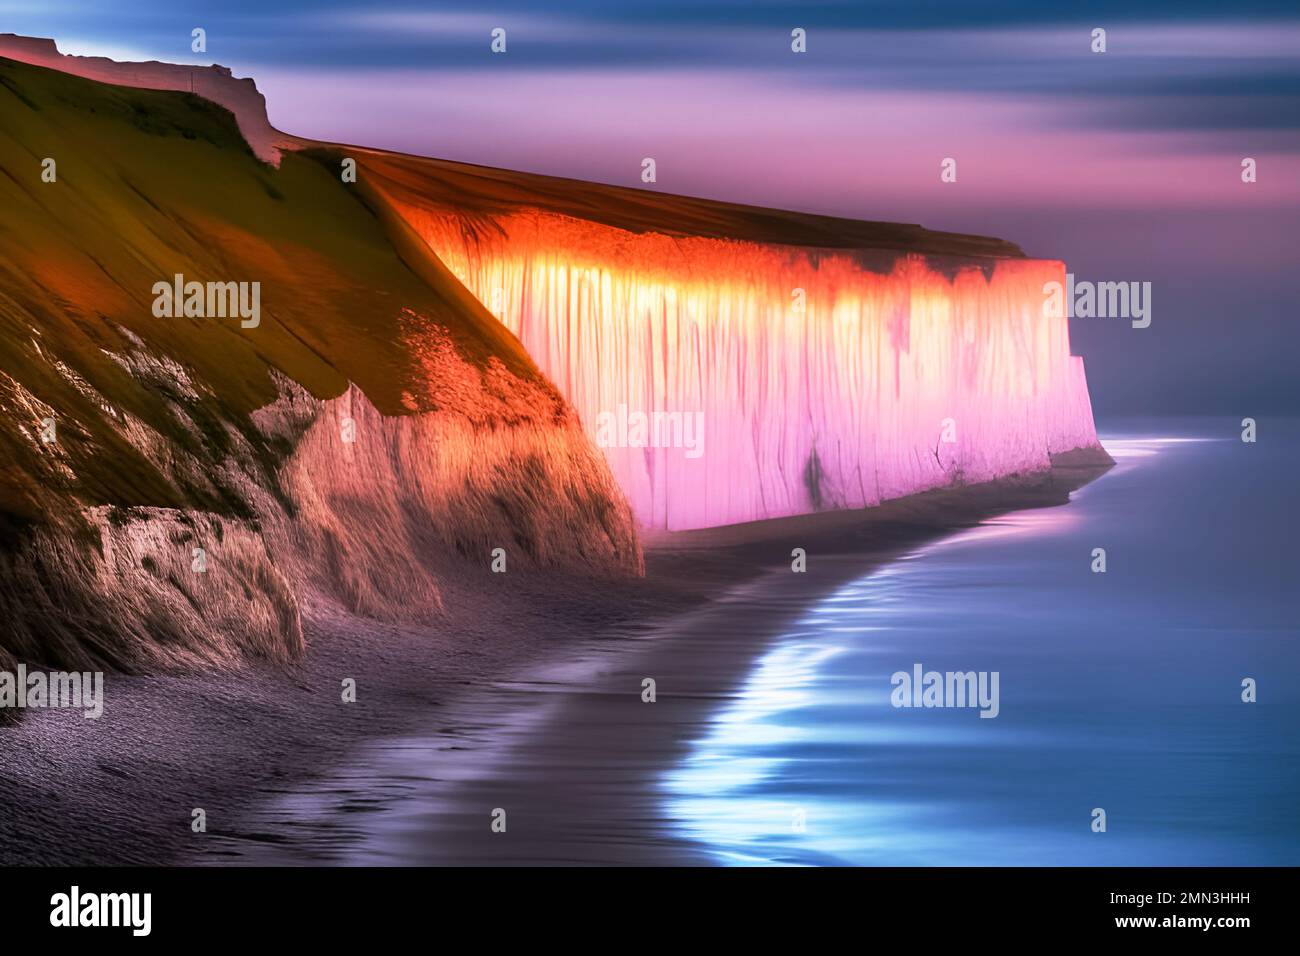 The White Cliffs of Dover at sunset depiction. Stock Photo